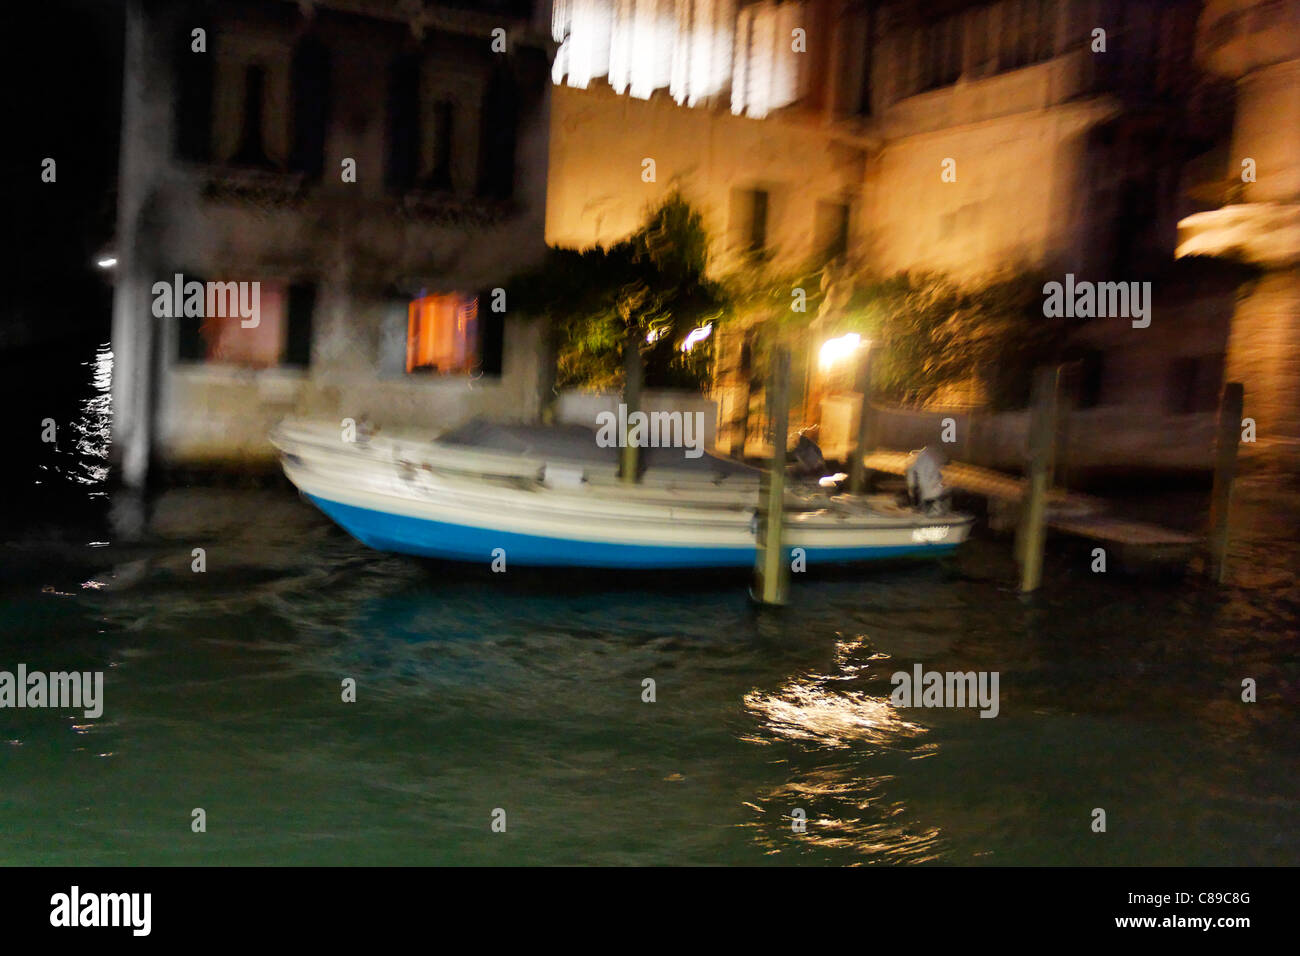 Anchored Venice boats in the night, blurred by the moving on the waves - a concept shot full of atmosphere. Stock Photo